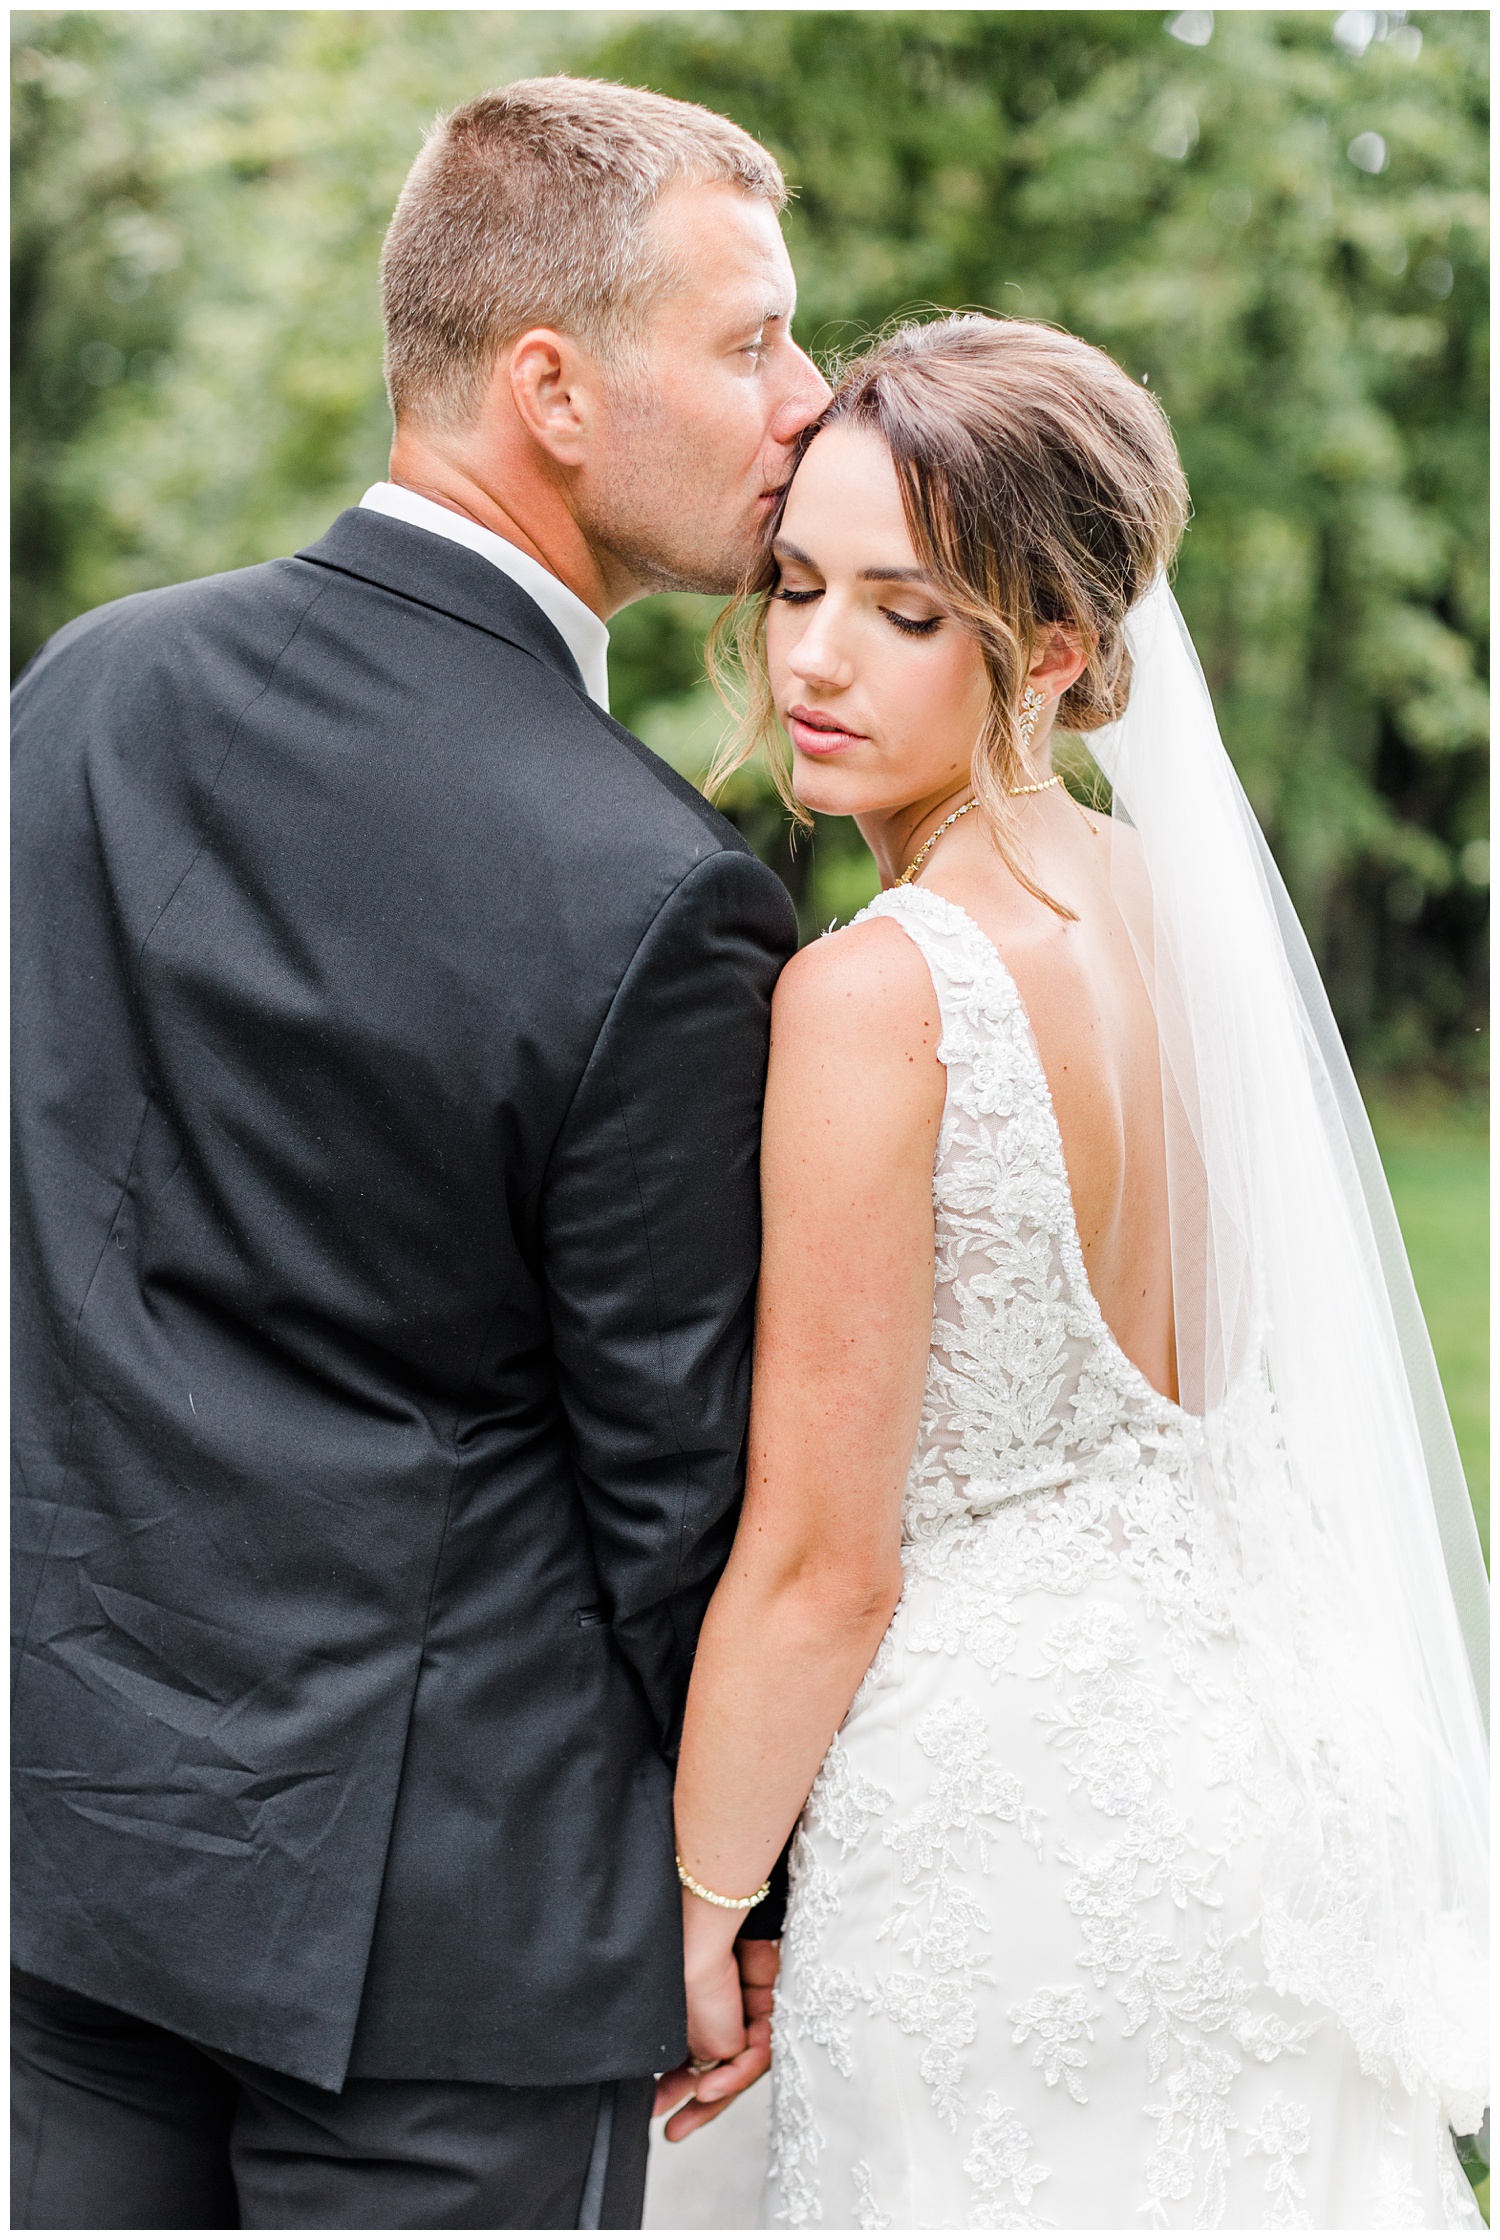 Cody kisses his bride Renee on the forehead at Call State Park before their wedding ceremony | CB Studio